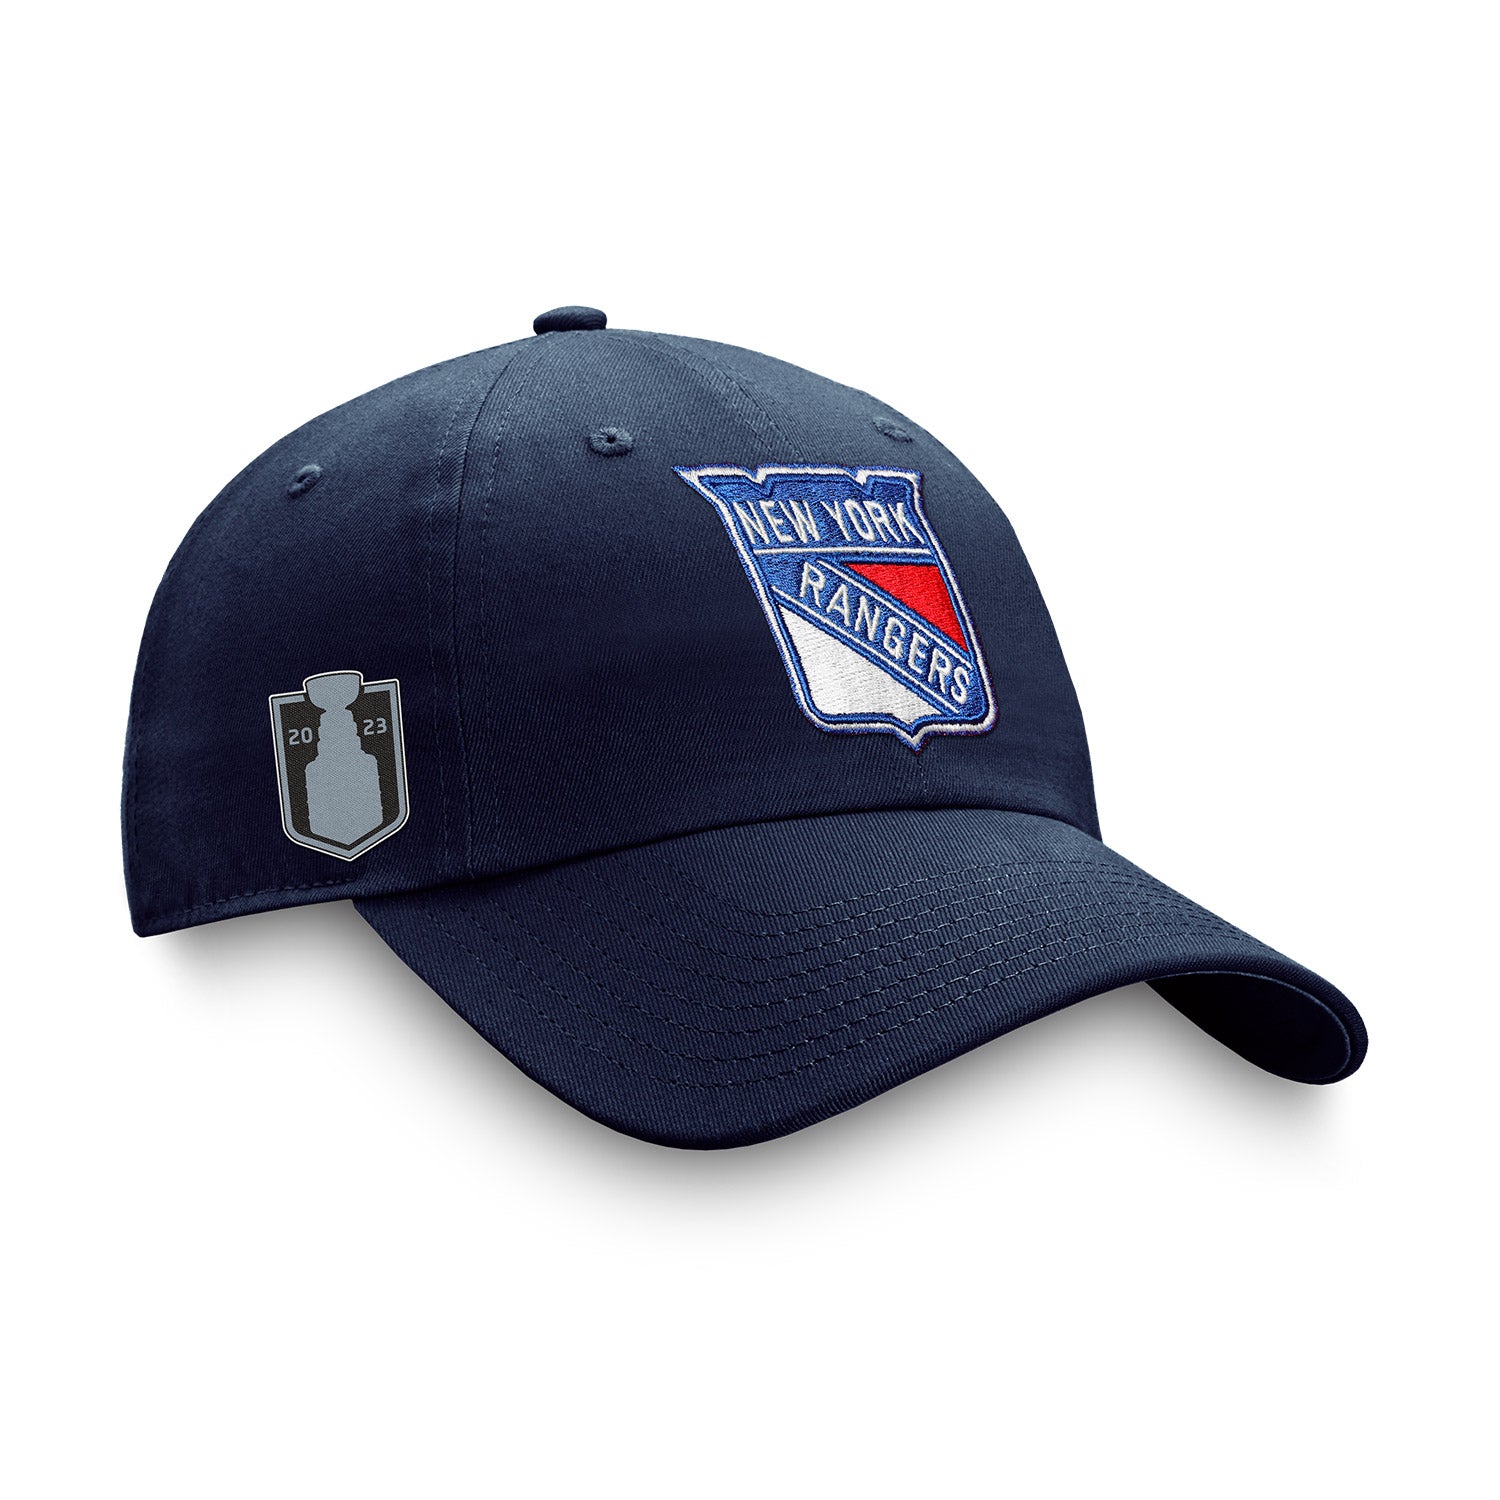 Reebok New York Rangers NHL Official Playoff Structured Adjustable Hat